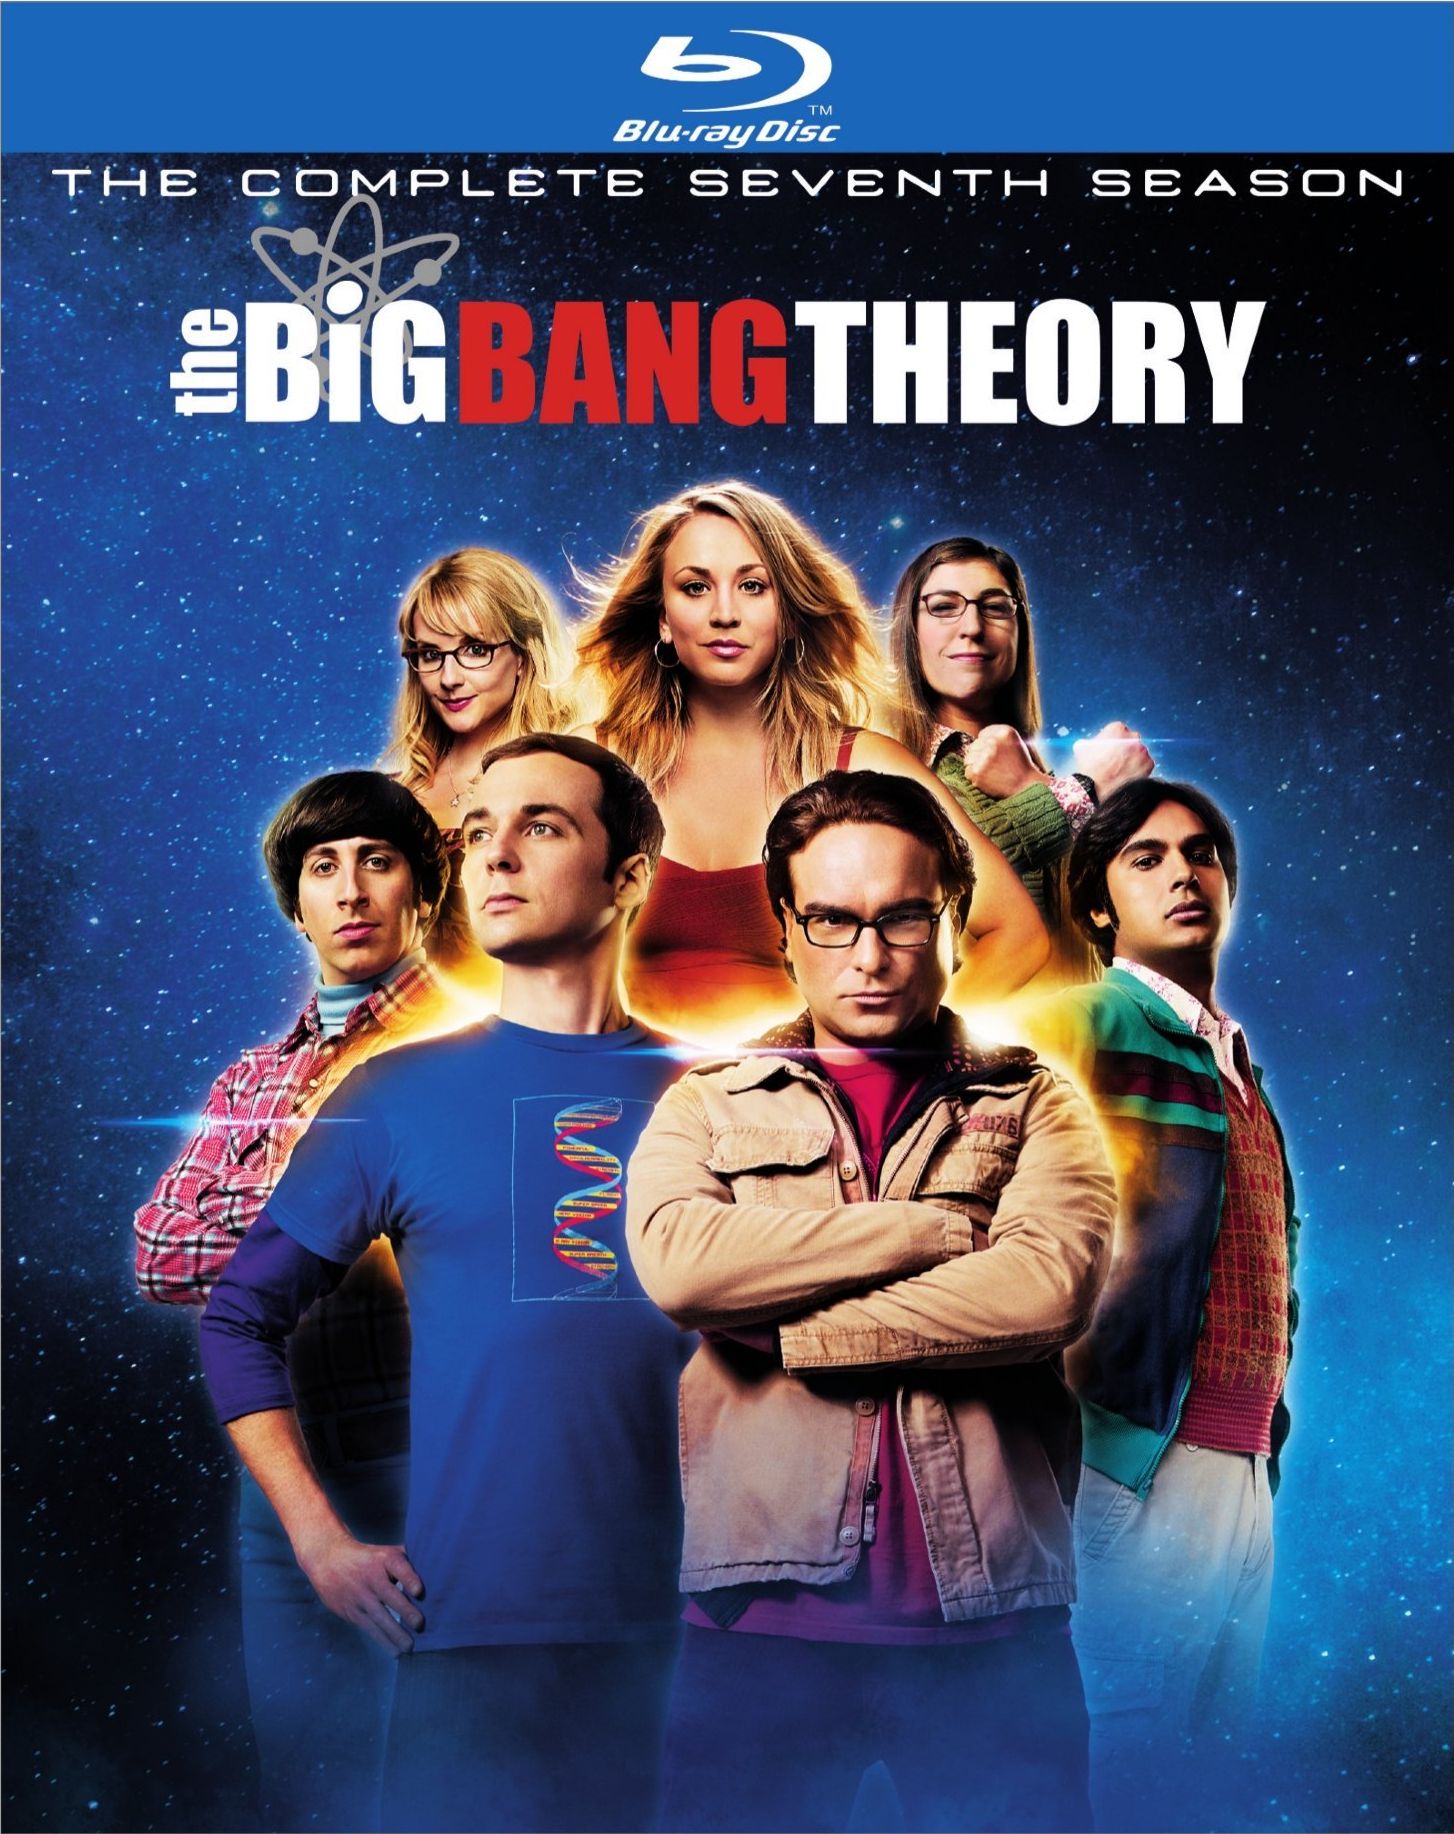 The Big Bang Theory DVD Release Date